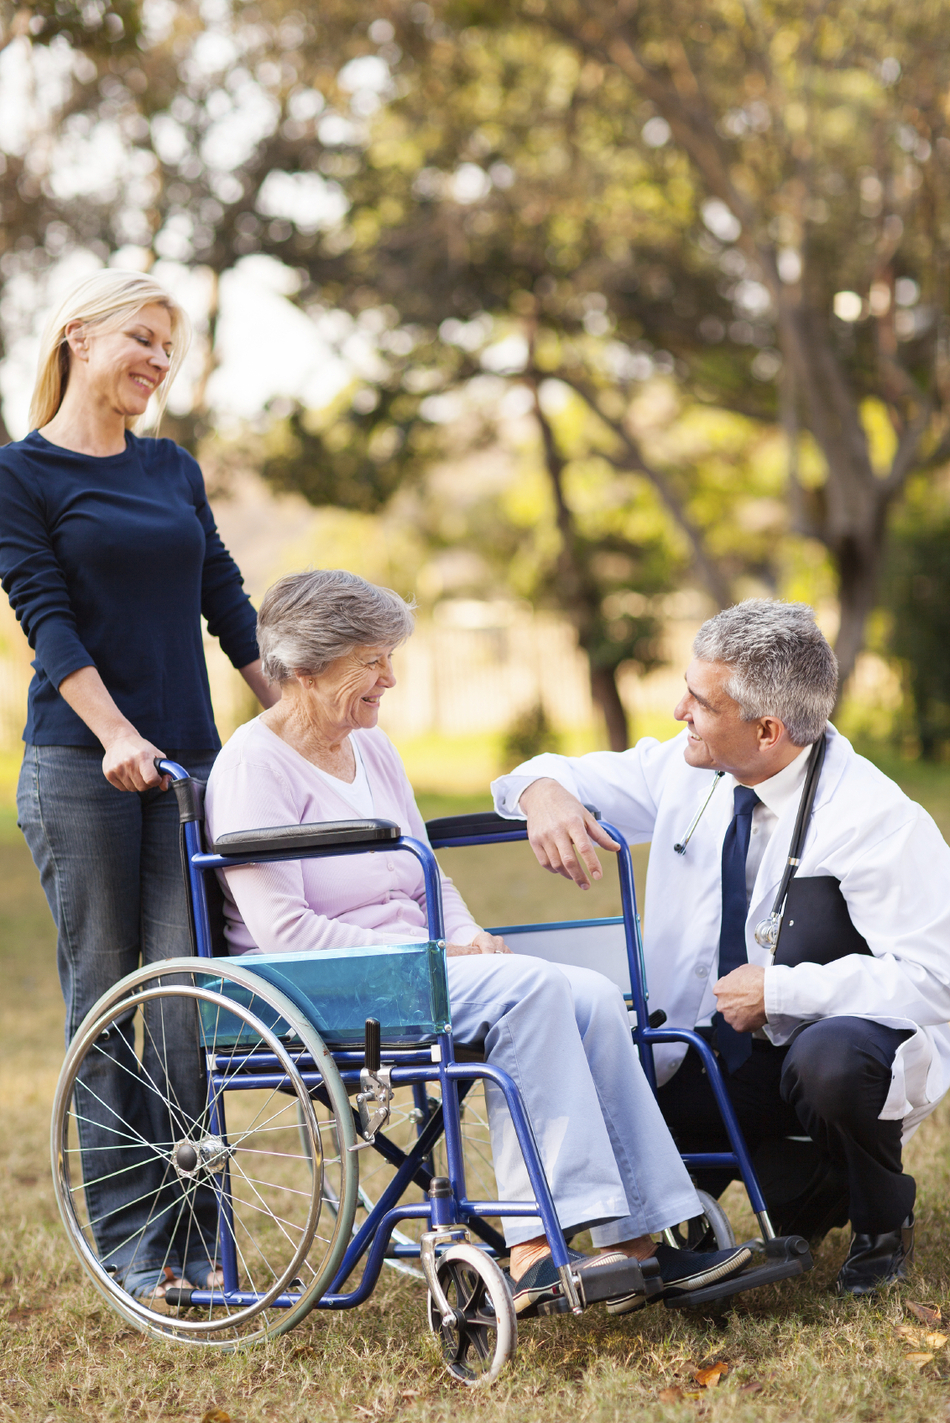 How to Help and What to Look for When Accompanying an Older Adult to a Doctor